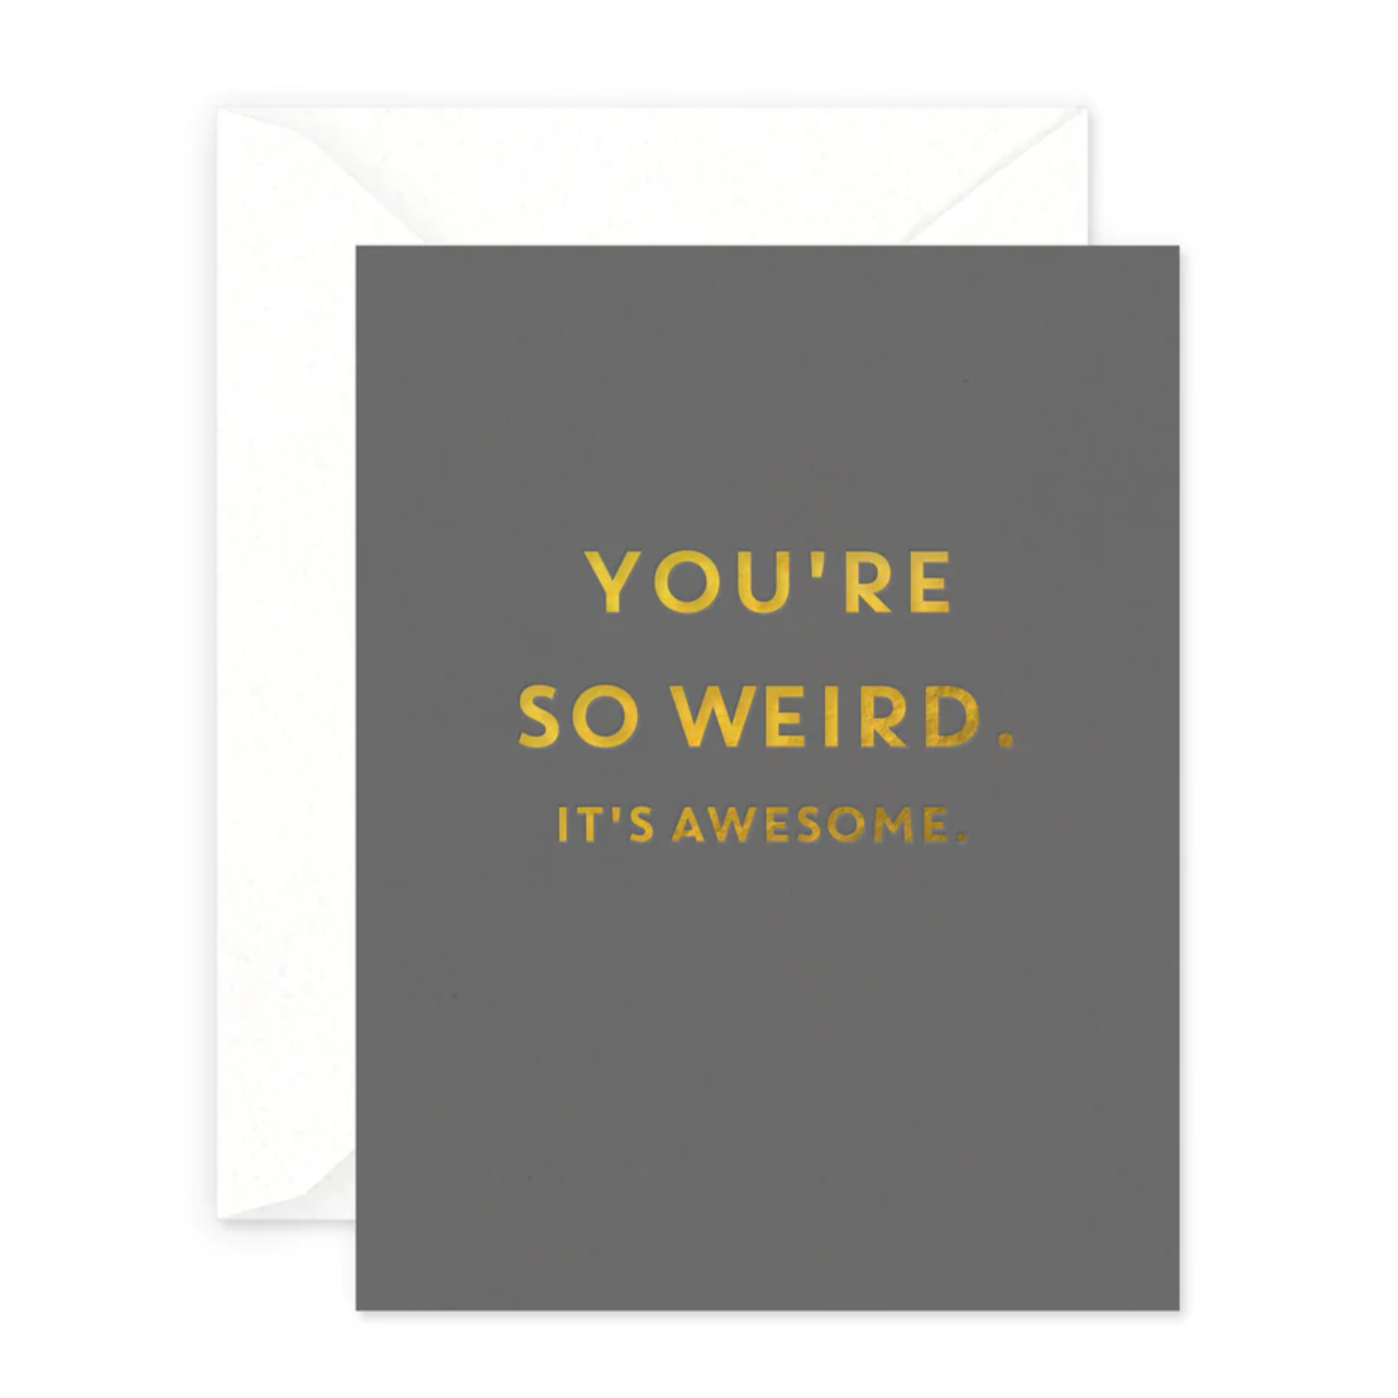 Awesomely Weird Card